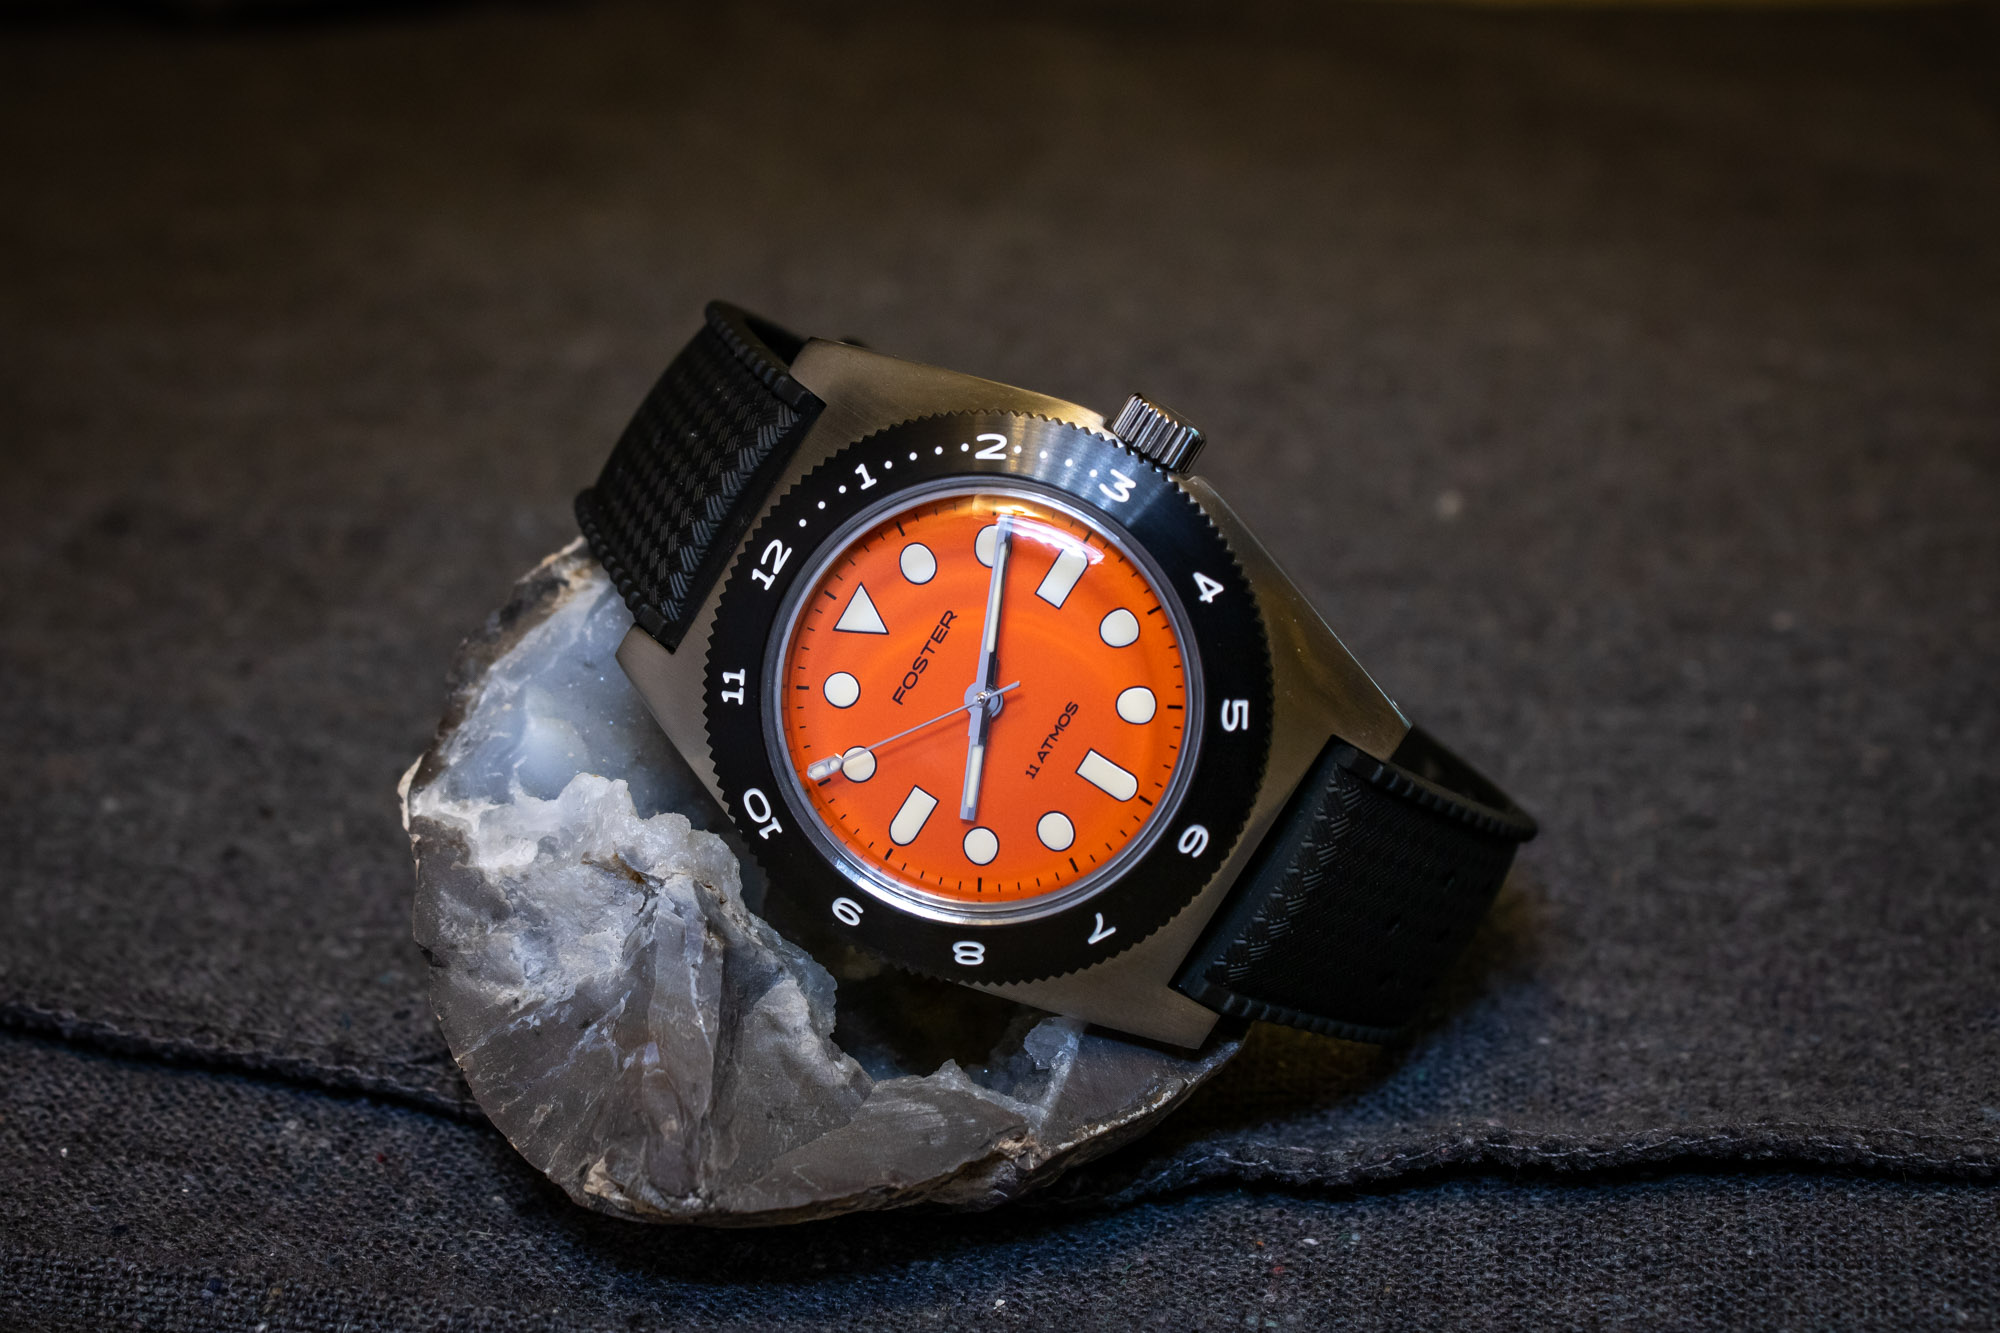 Hands-On Debut: Foster Watch Company 11 Atmos Skin Diver | aBlogtoWatch